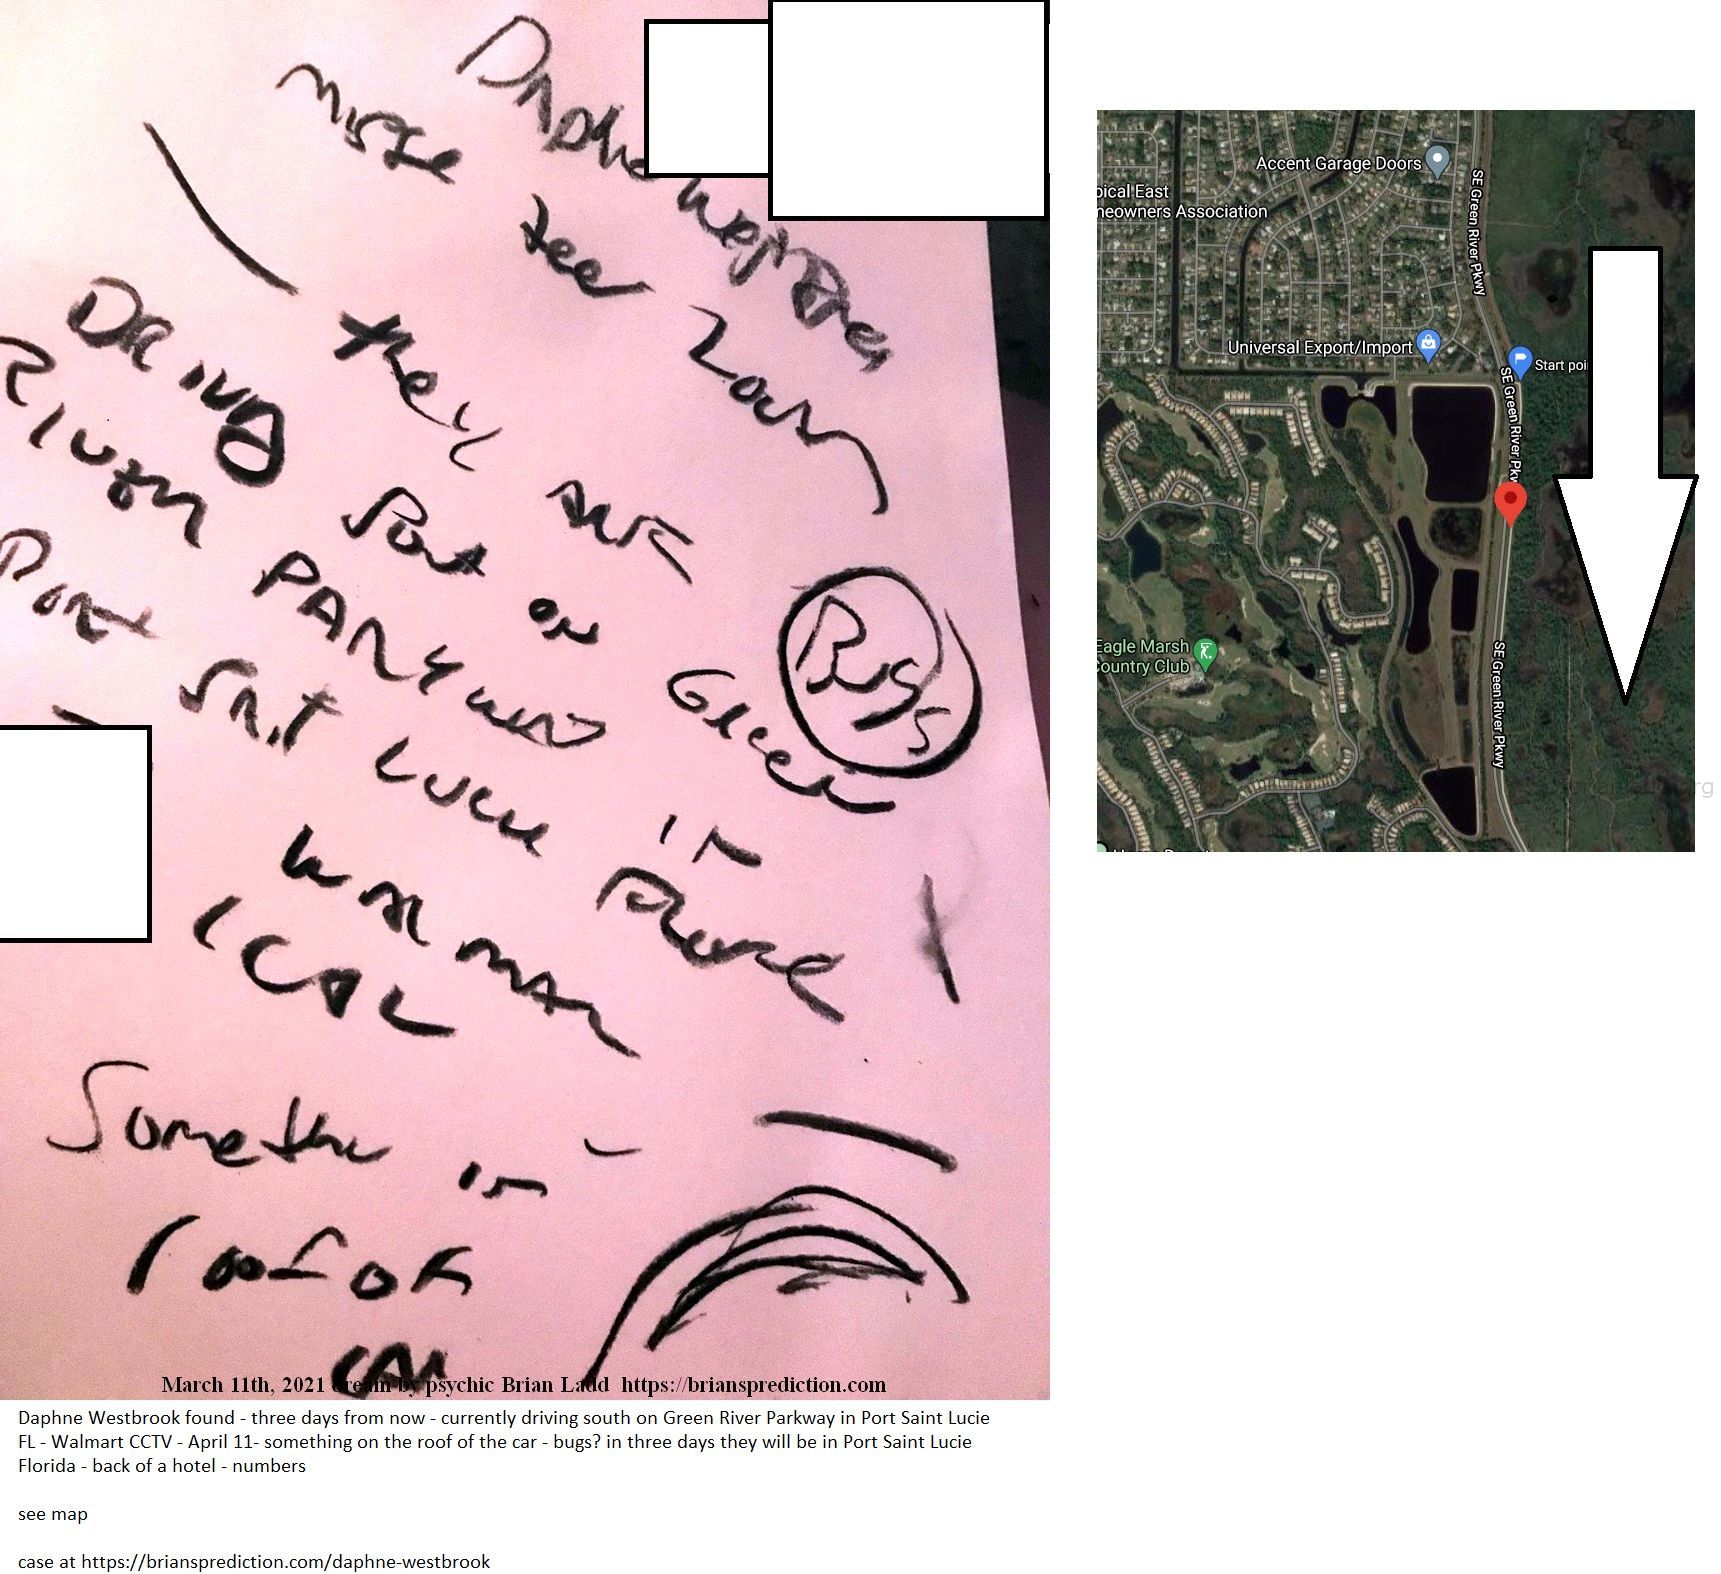 14595 11 March 2021 1 - Daphne Westbrook Found - Three Days From Now - Currently Driving South On Green River Parkway In...
Daphne Westbrook Found - Three Days From Now - Currently Driving South On Green River Parkway In Port Saint Lucie Fl - Walmart Cctv - April 11- Something On The Roof Of The Car - Bugs? In Three Days They Will Be In Port Saint Lucie Florida - Back Of A Hotel - Numbers.  See Map  Case At   https://briansprediction.com/Daphne-Westbrook
